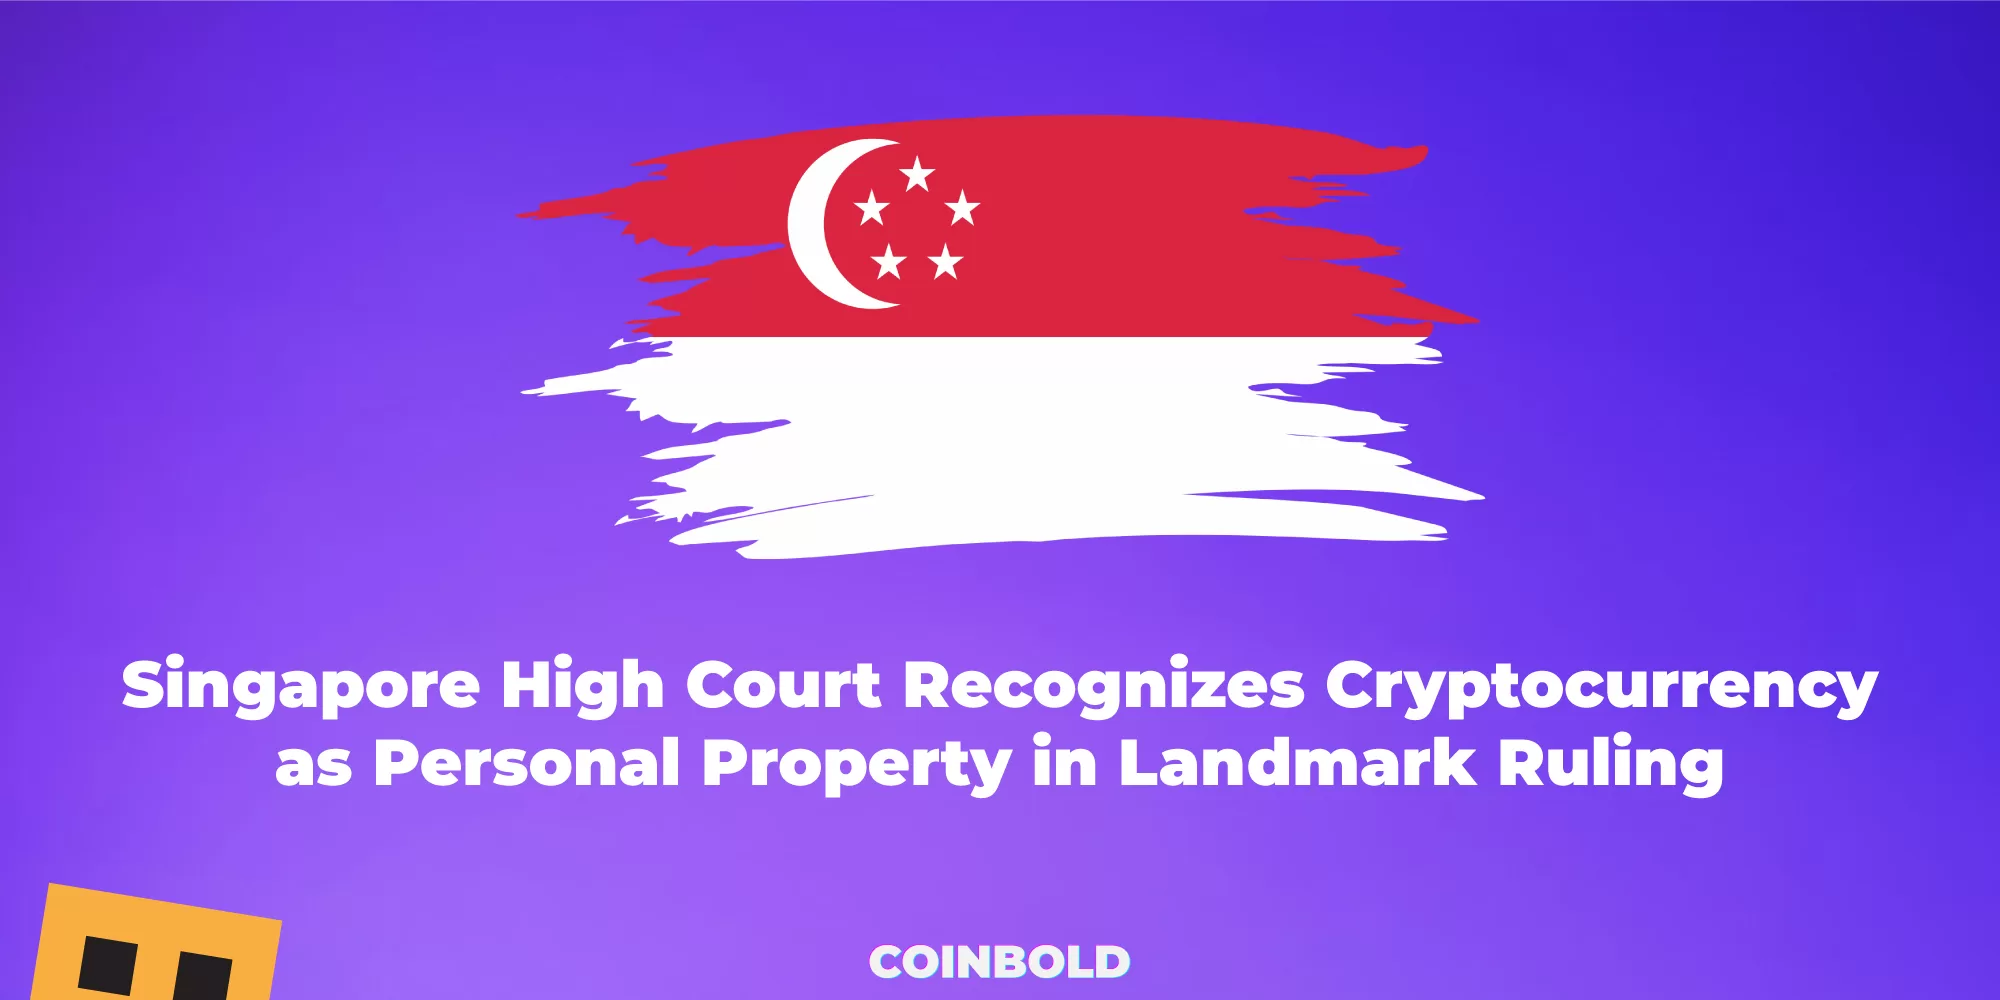 Singapore High Court Recognizes Cryptocurrency as Personal Property in Landmark Ruling